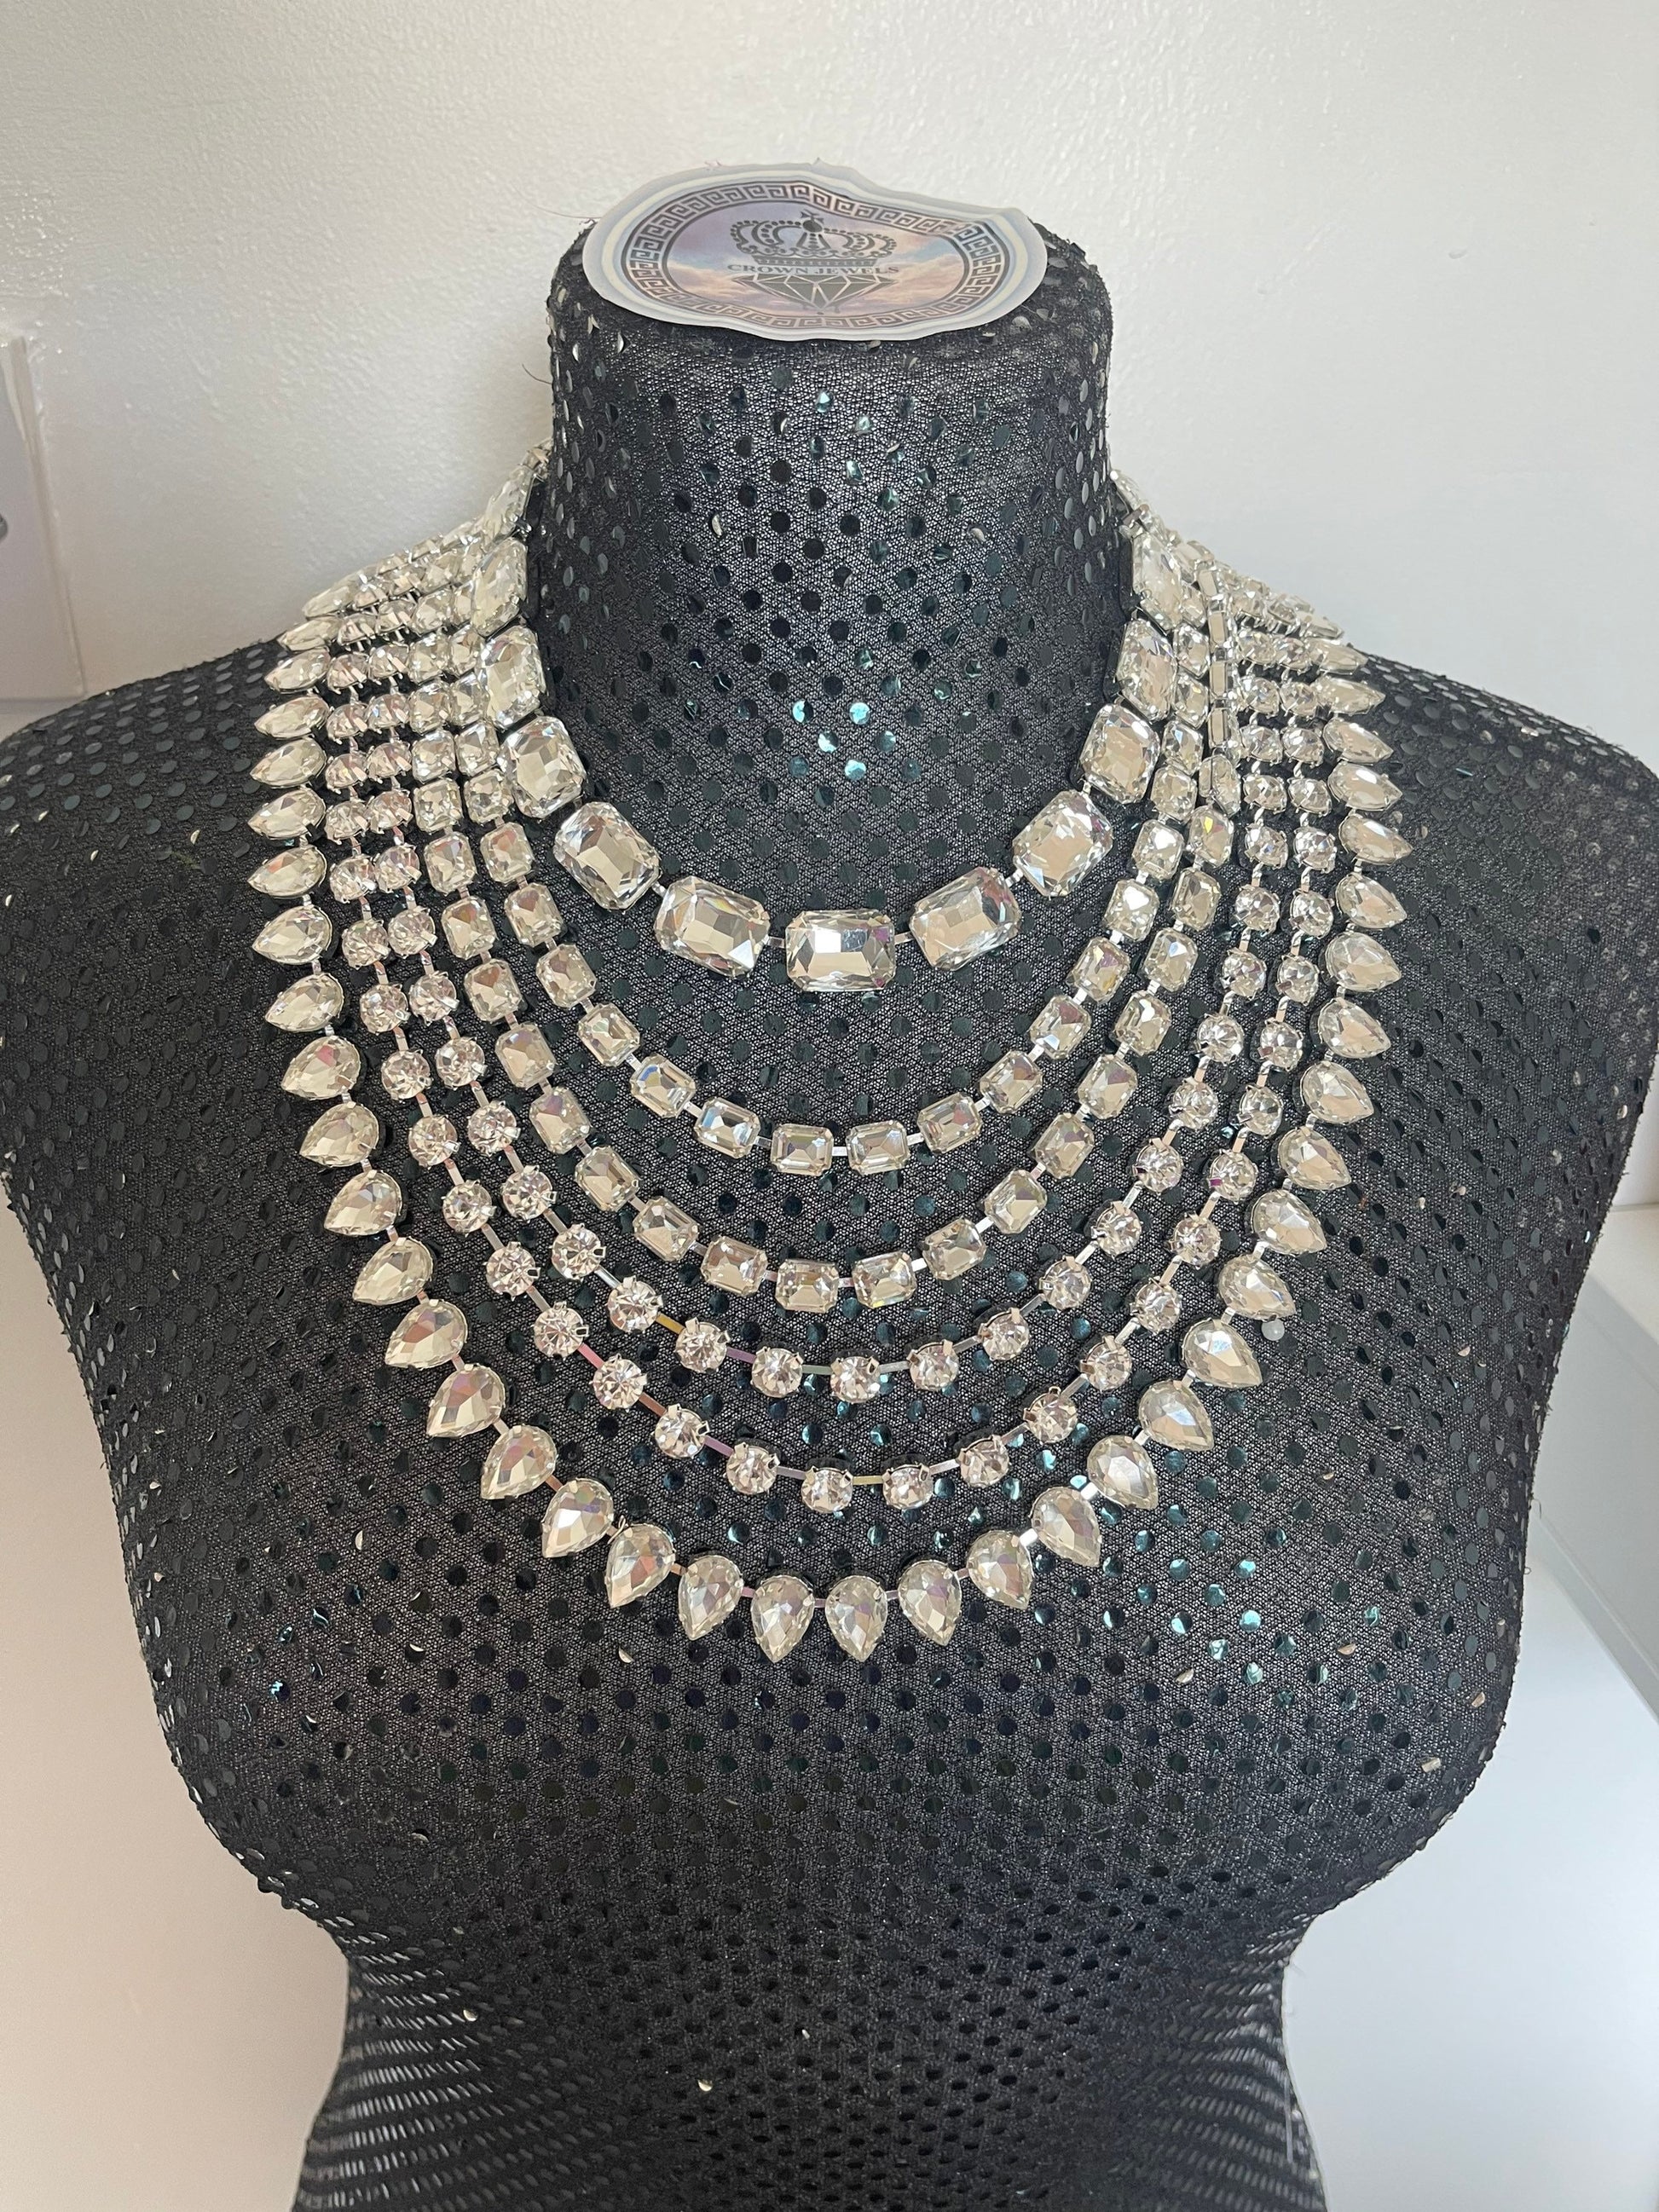 Large Statement necklace / Pendent Necklace / Adjustable / Drag Queen Costume Jewelry / Cocktails Jewellery